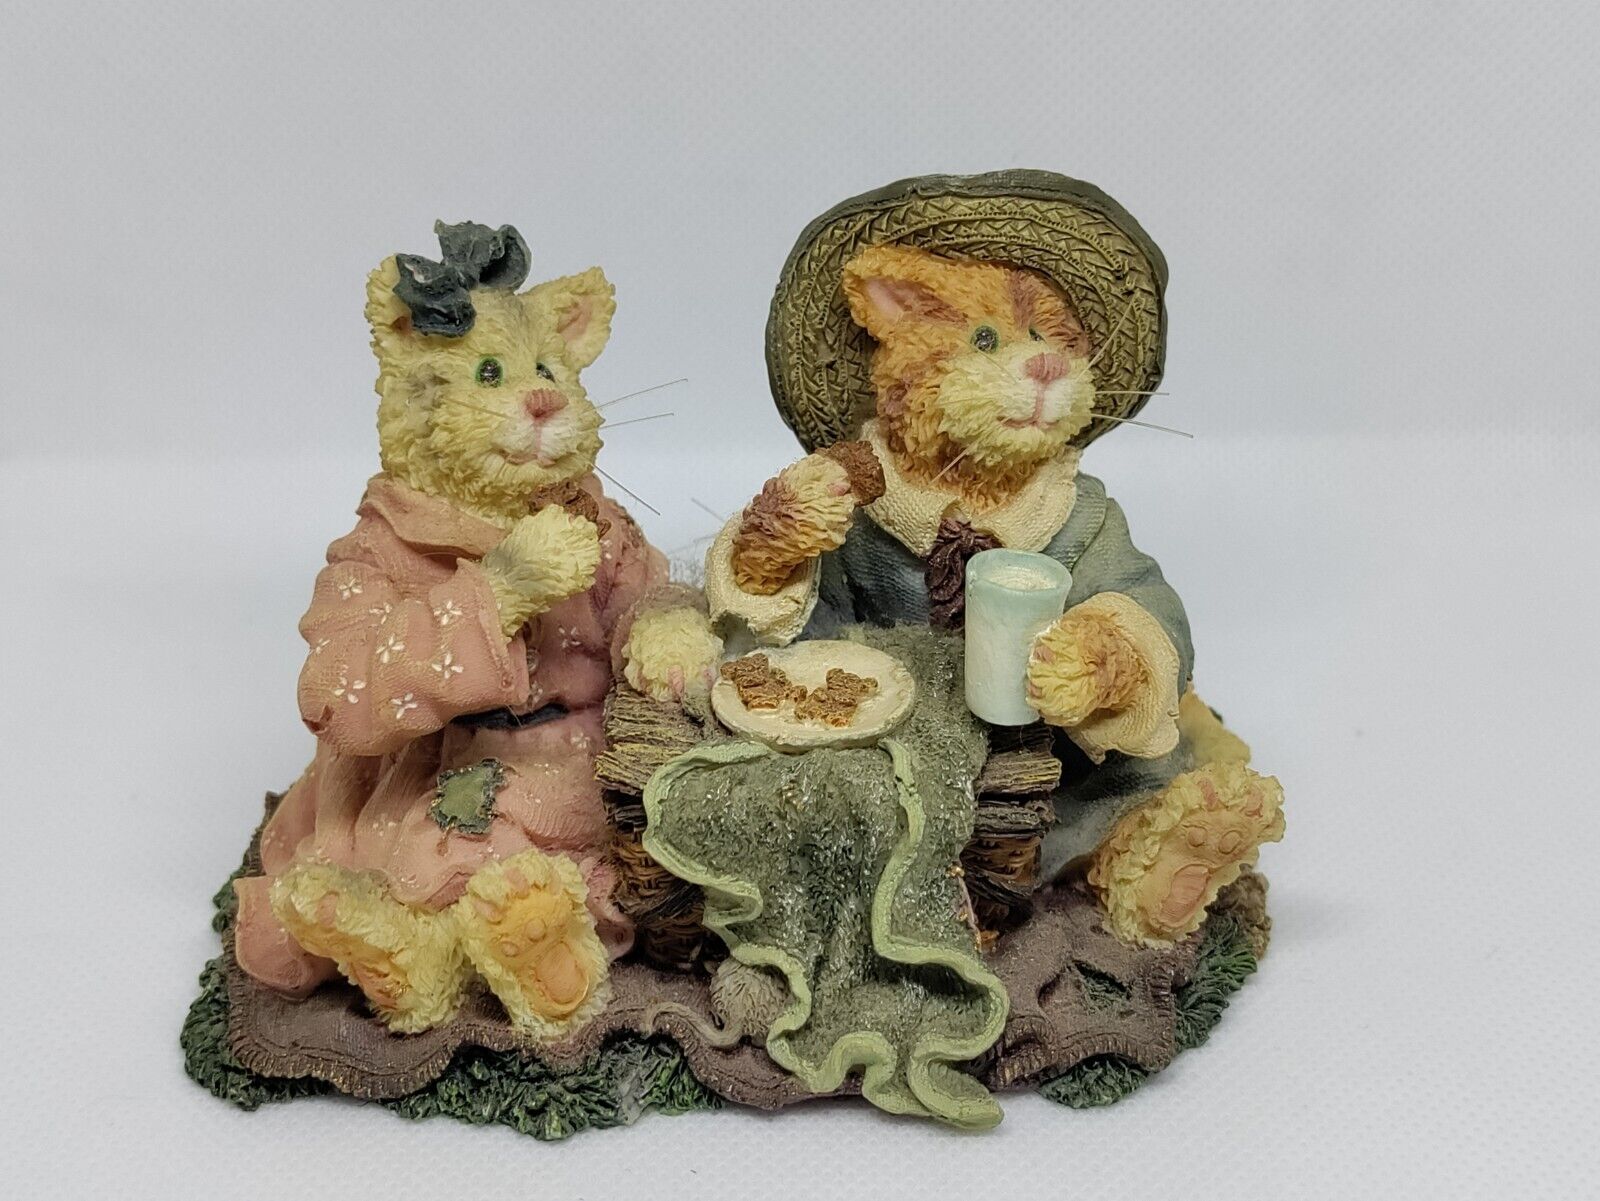 Boyds Bears Purrstone Collection Sissy & Missy Picnic Pals 2002 Figurine